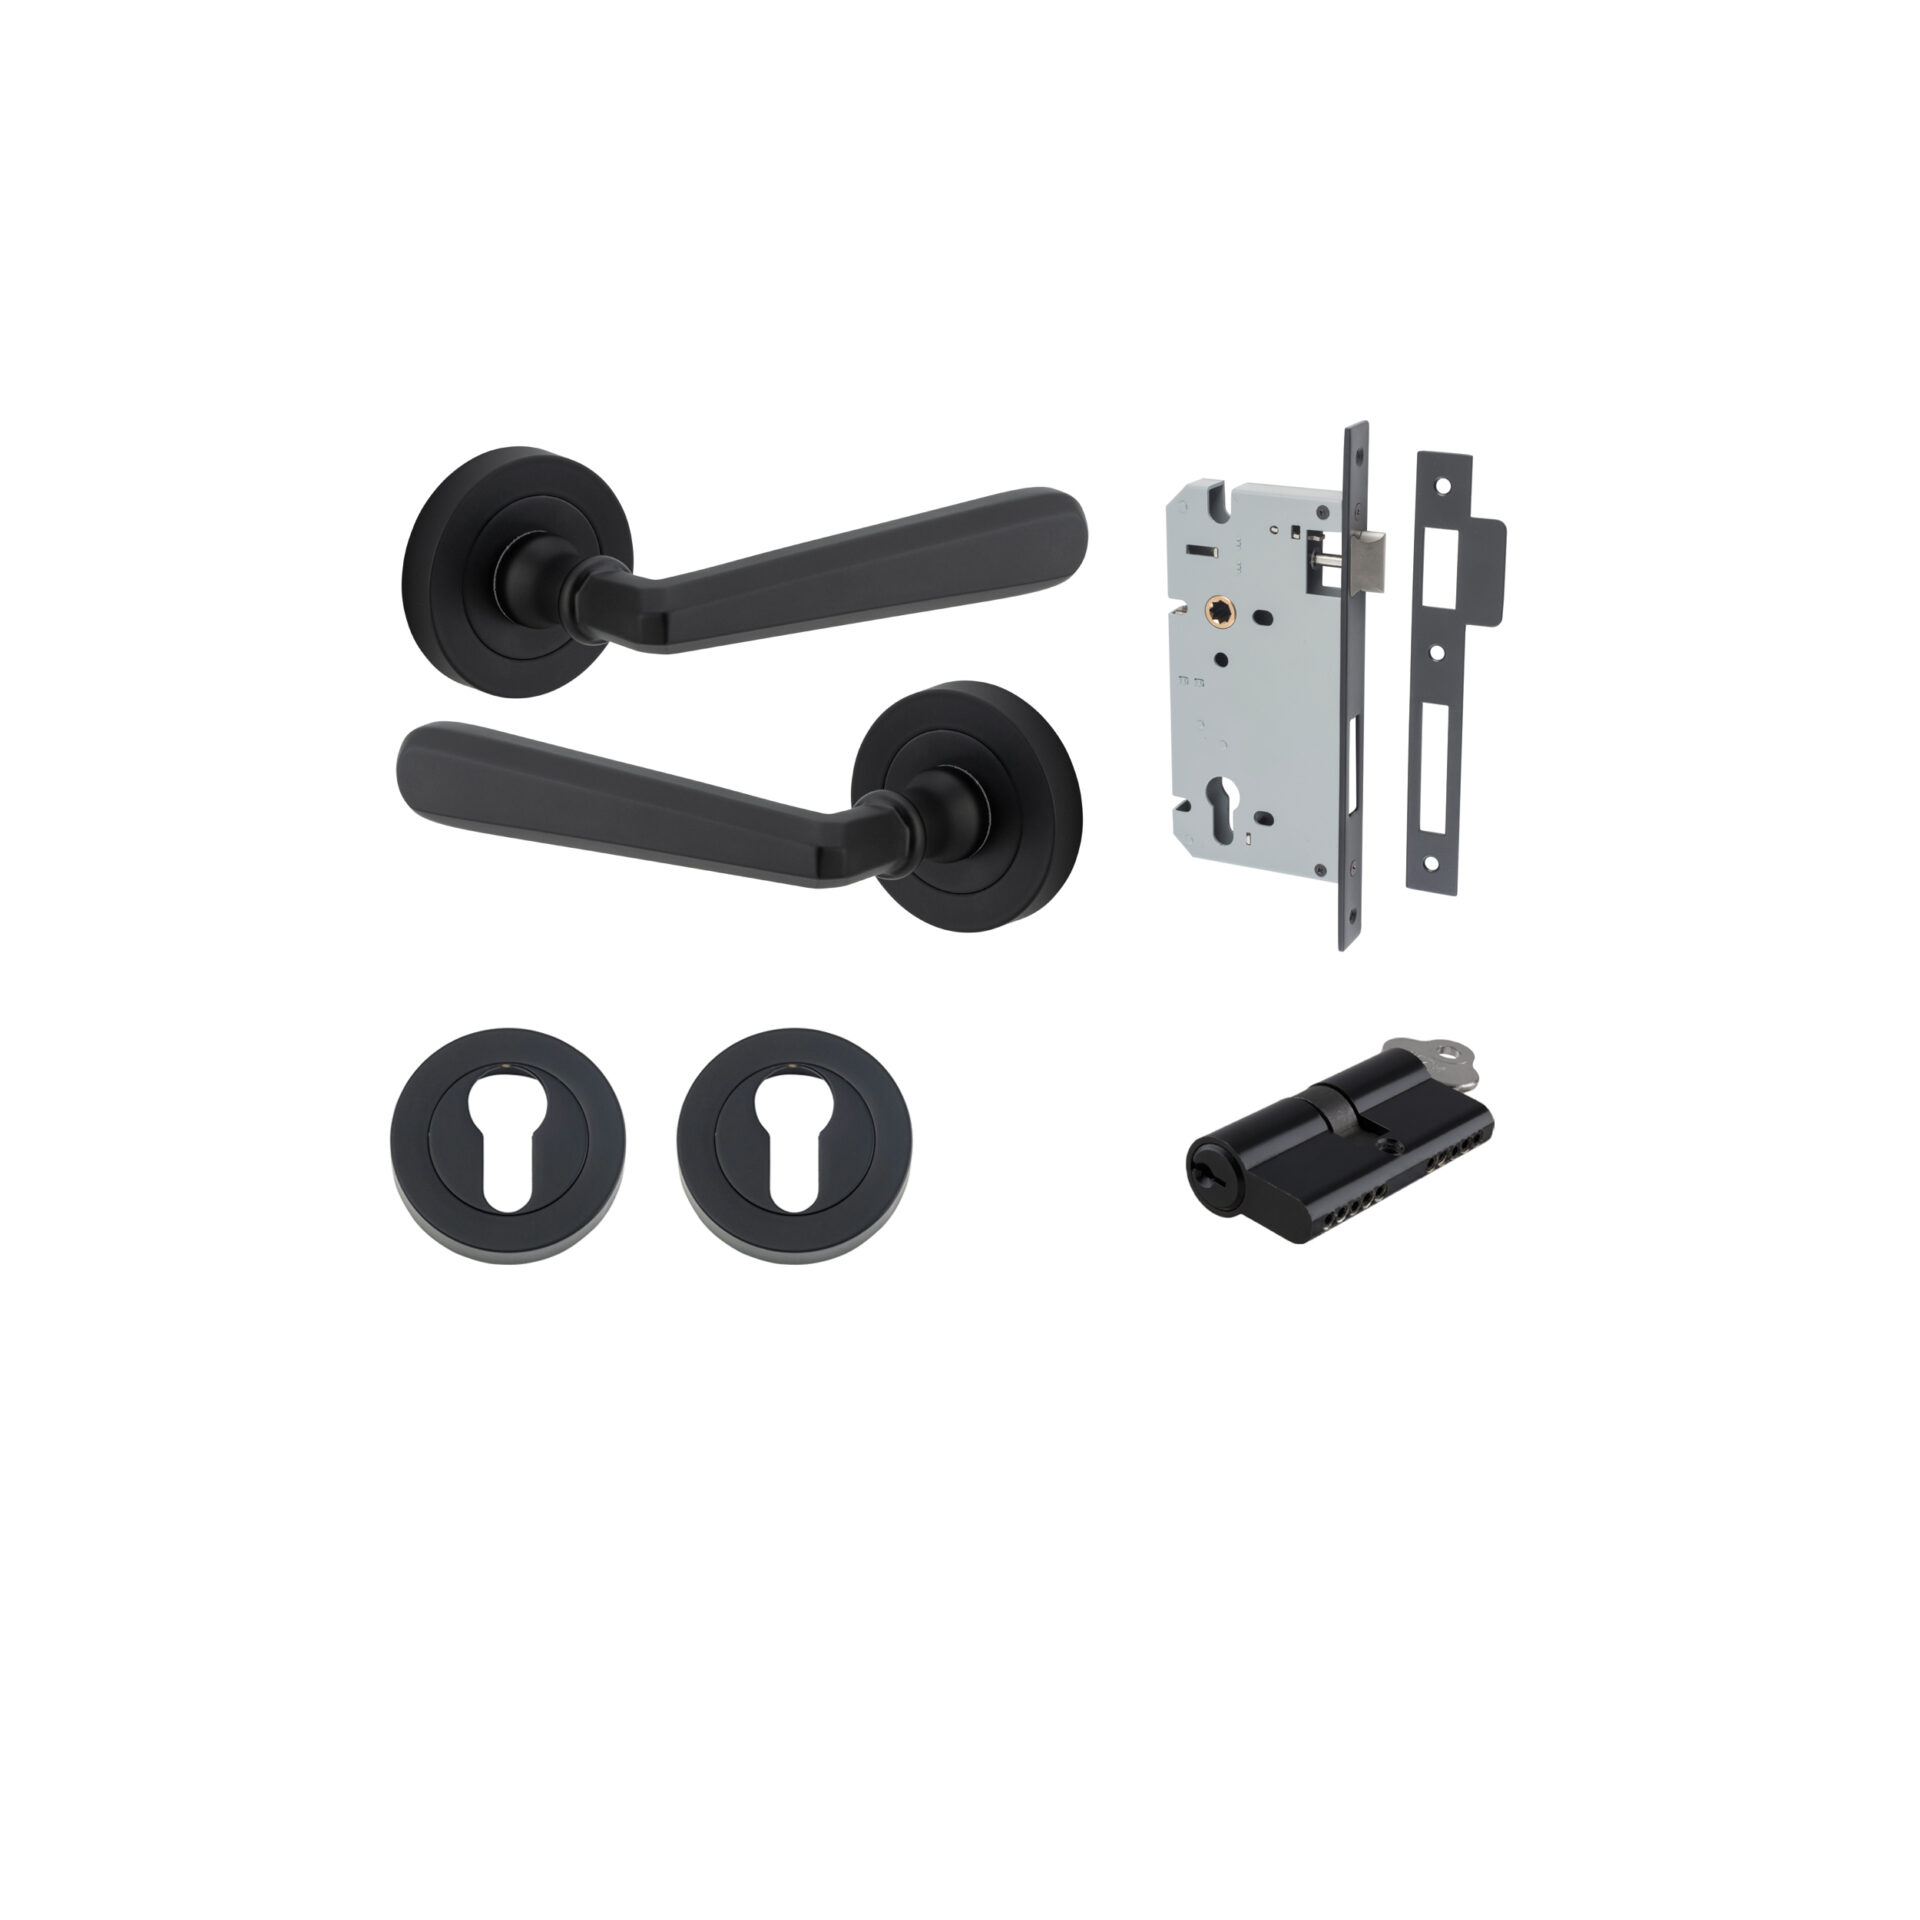 Copenhagen Lever - Round Rose Entrance Kit with Separate High Security Lock